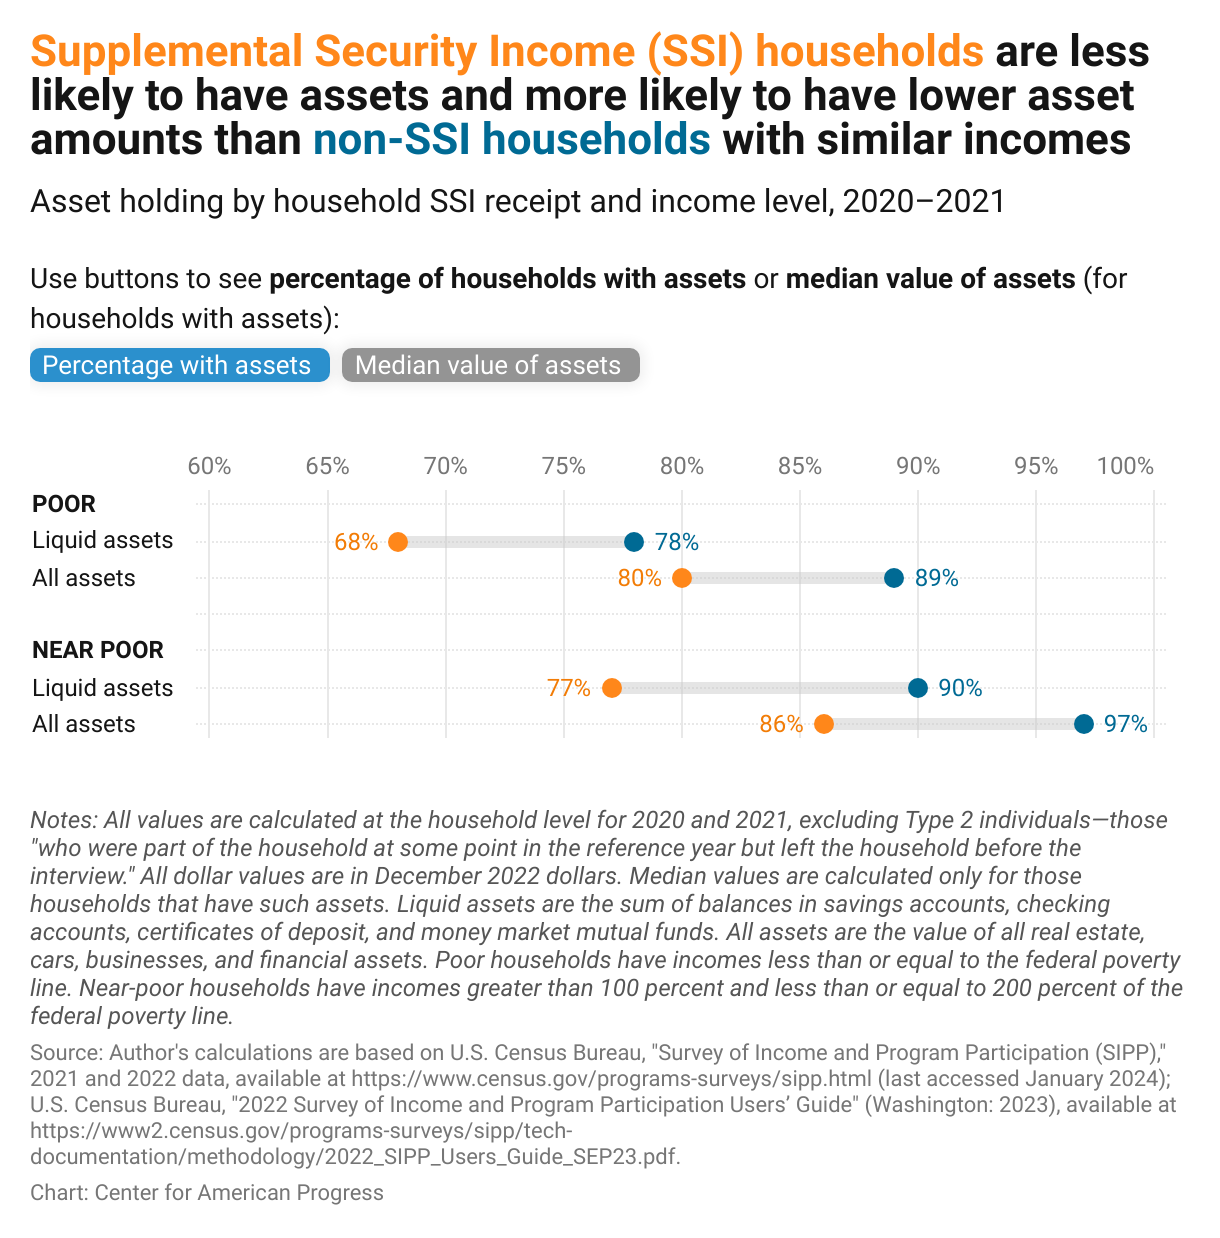 Chart showing that among low-income households, those that receive SSI benefits have a lower chance of having assets as well as have lower asset amounts; for example, 68 percent of SSI households have liquid assets, compared with 78 percent of non-SSI households.